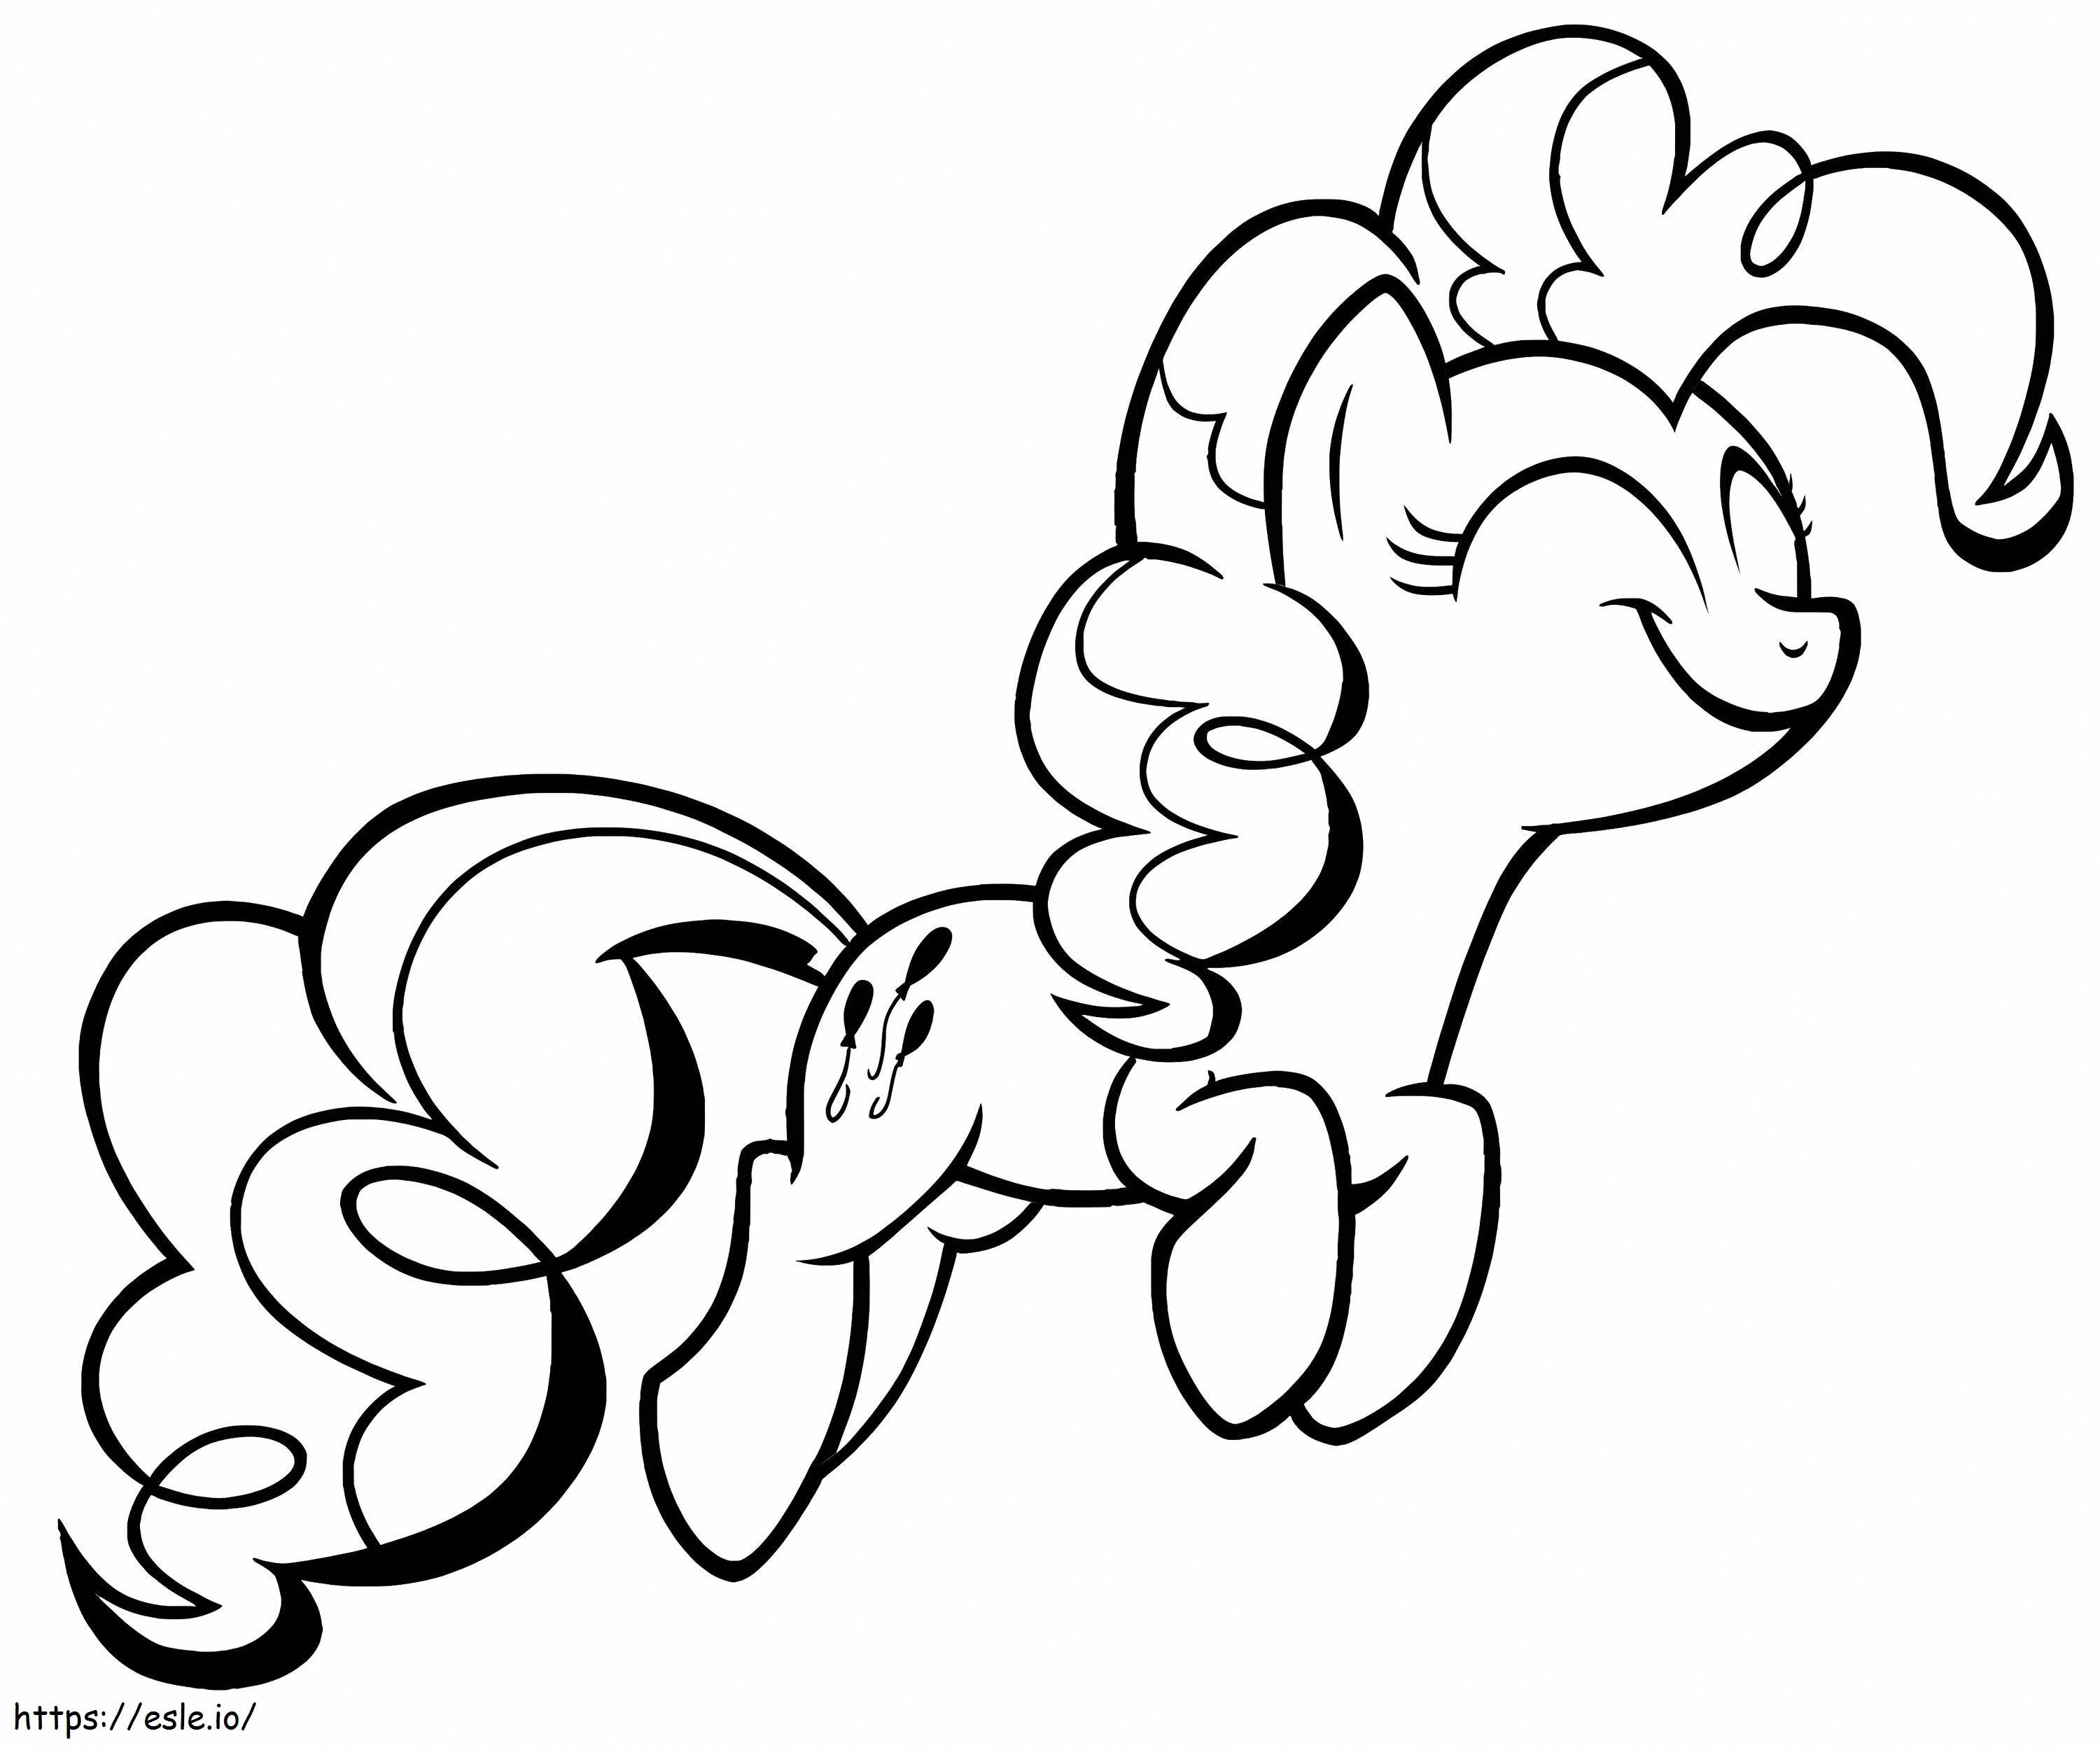 Pinkie Pie Is Happy coloring page